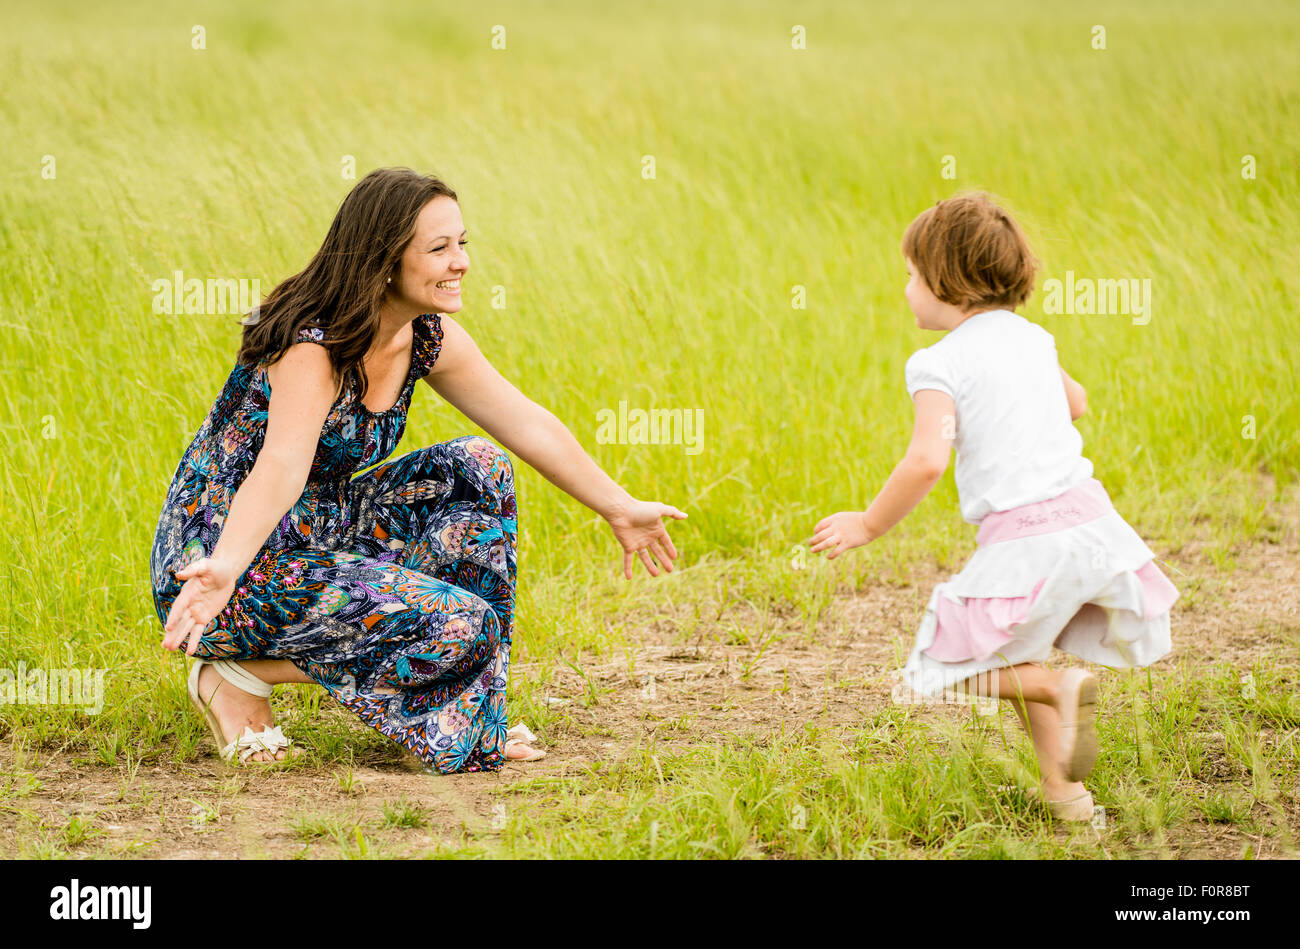 Child running to mother who is waiting with open arms Stock Photo